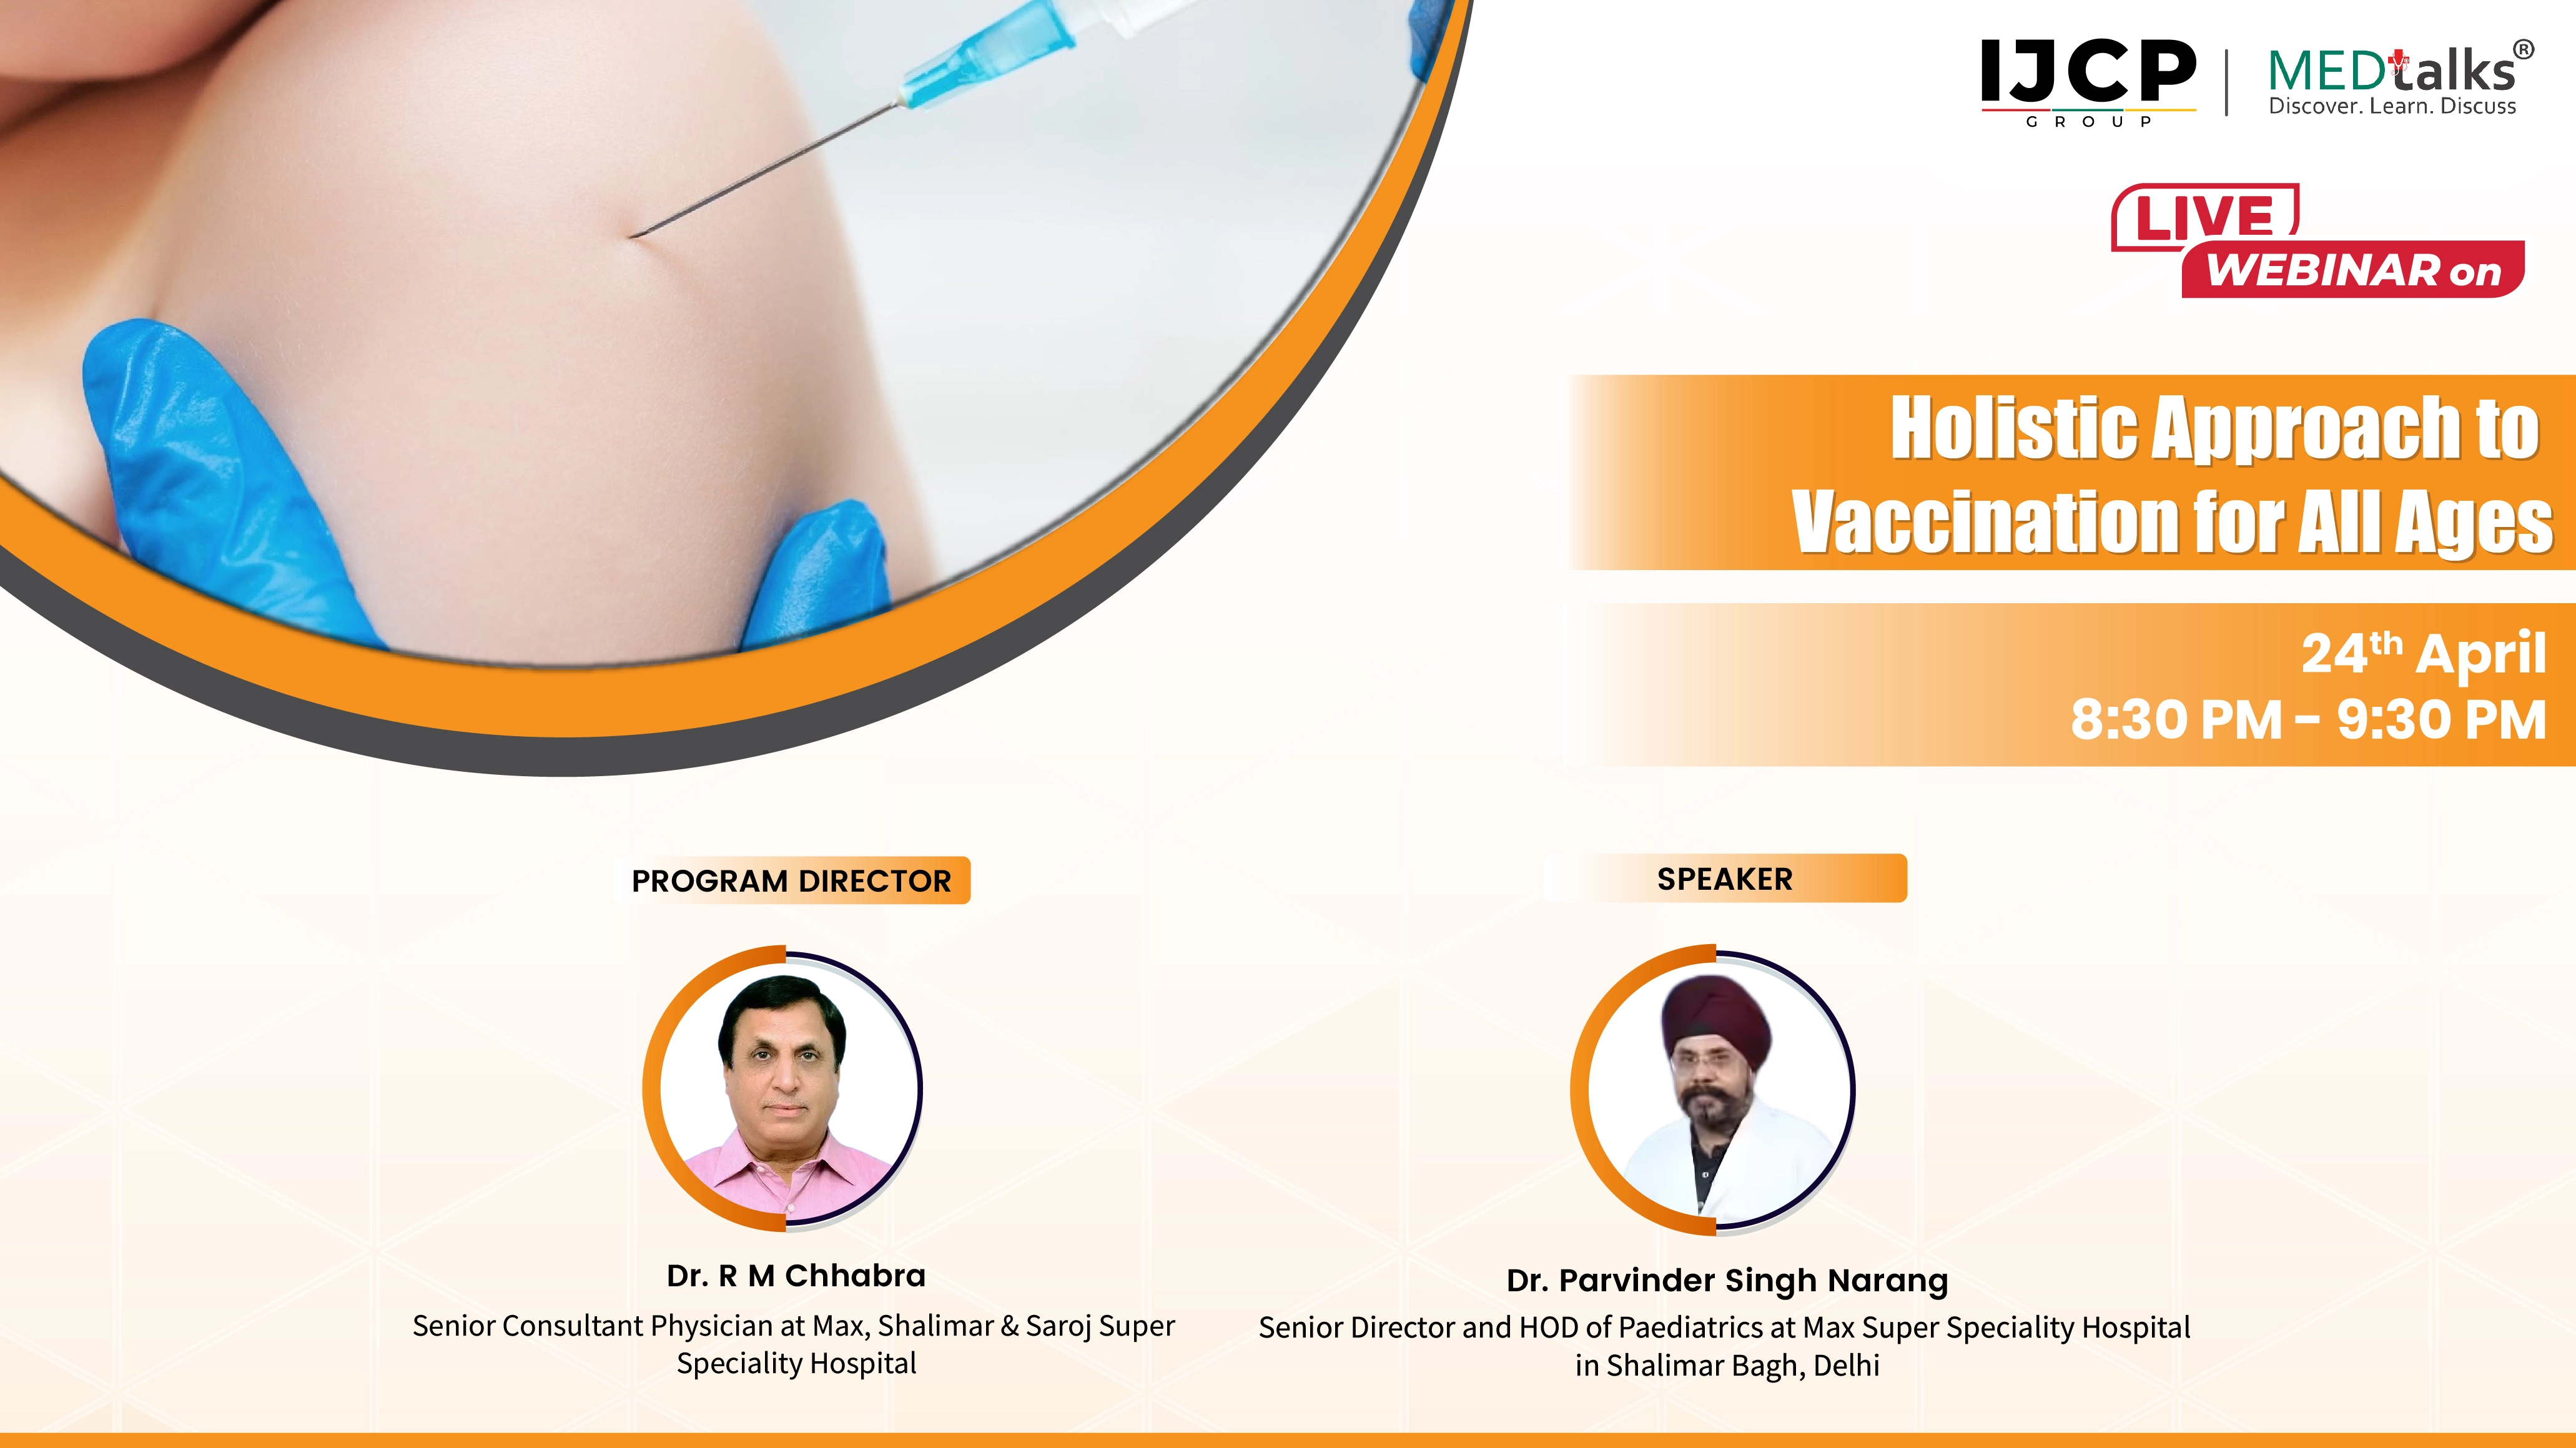 Holistic Approach to Vaccination for All Ages